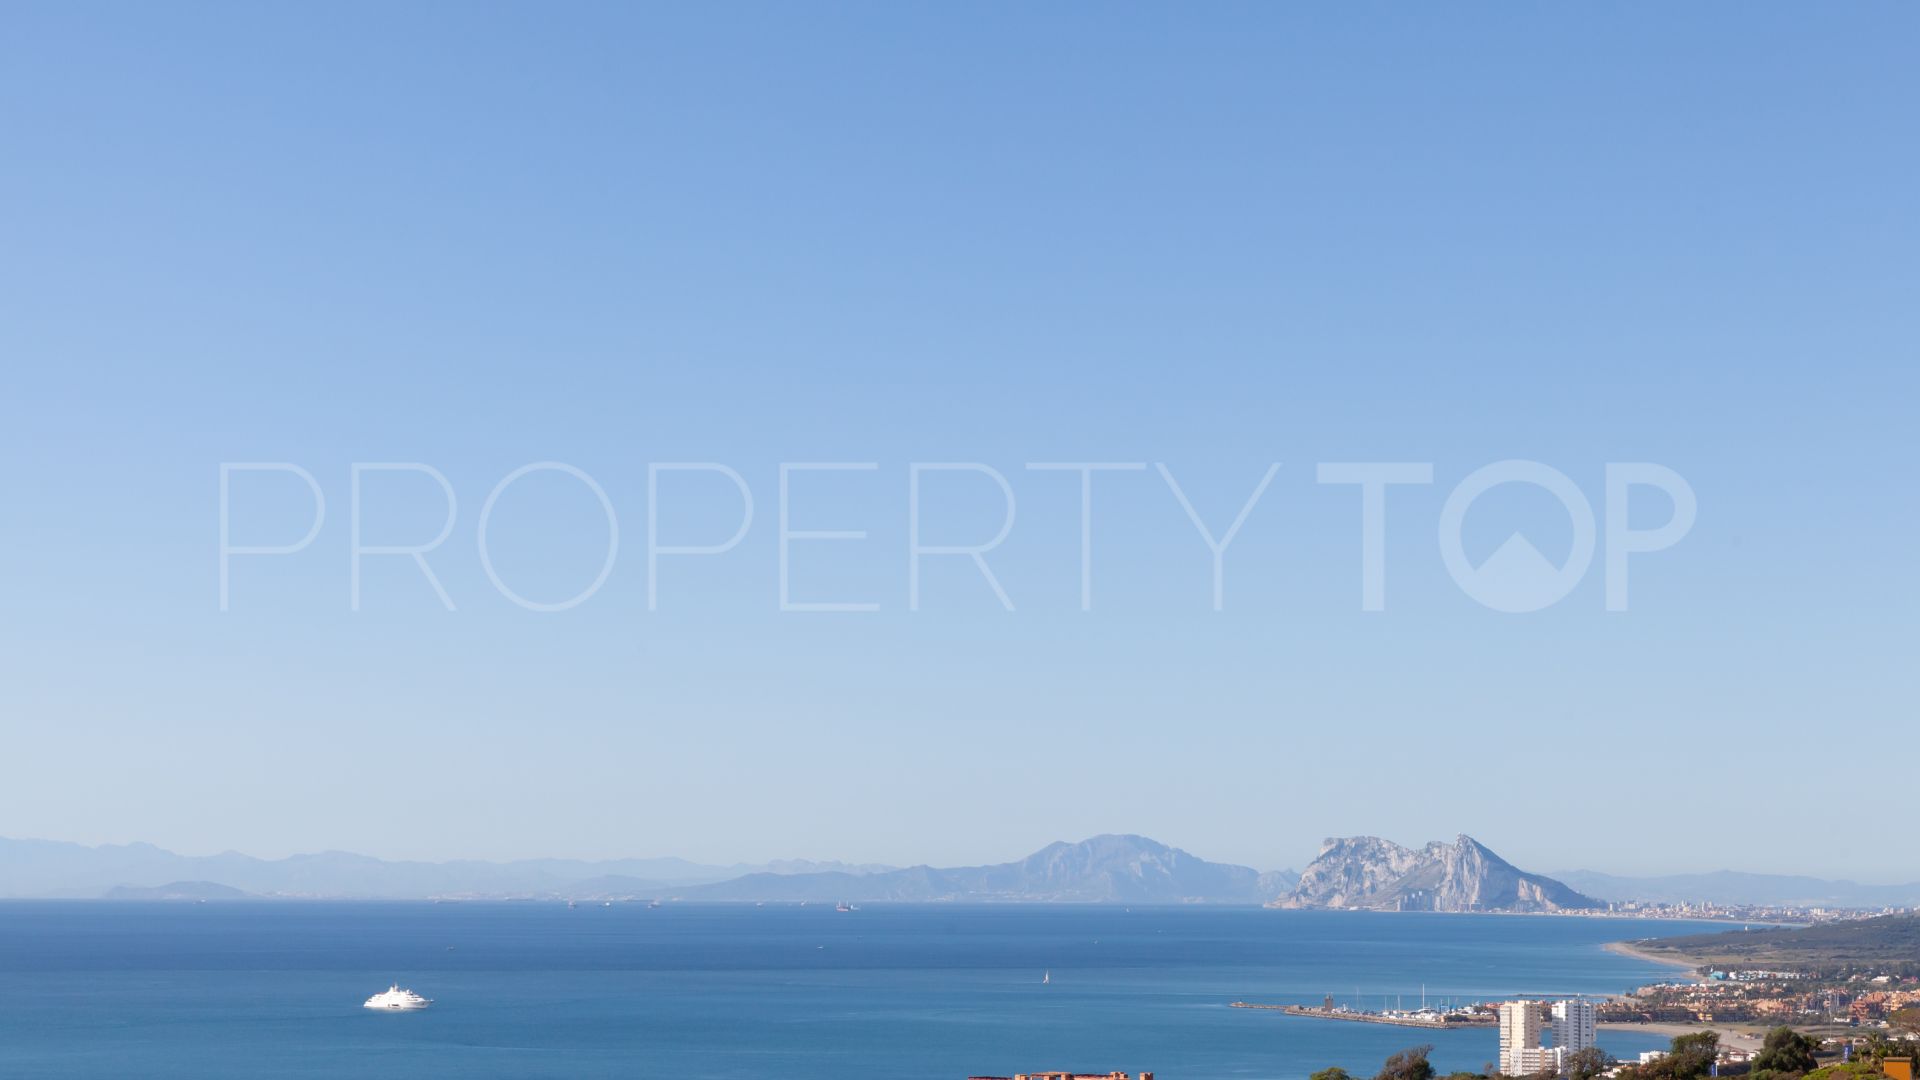 Town house with 3 bedrooms for sale in Bahia de las Rocas